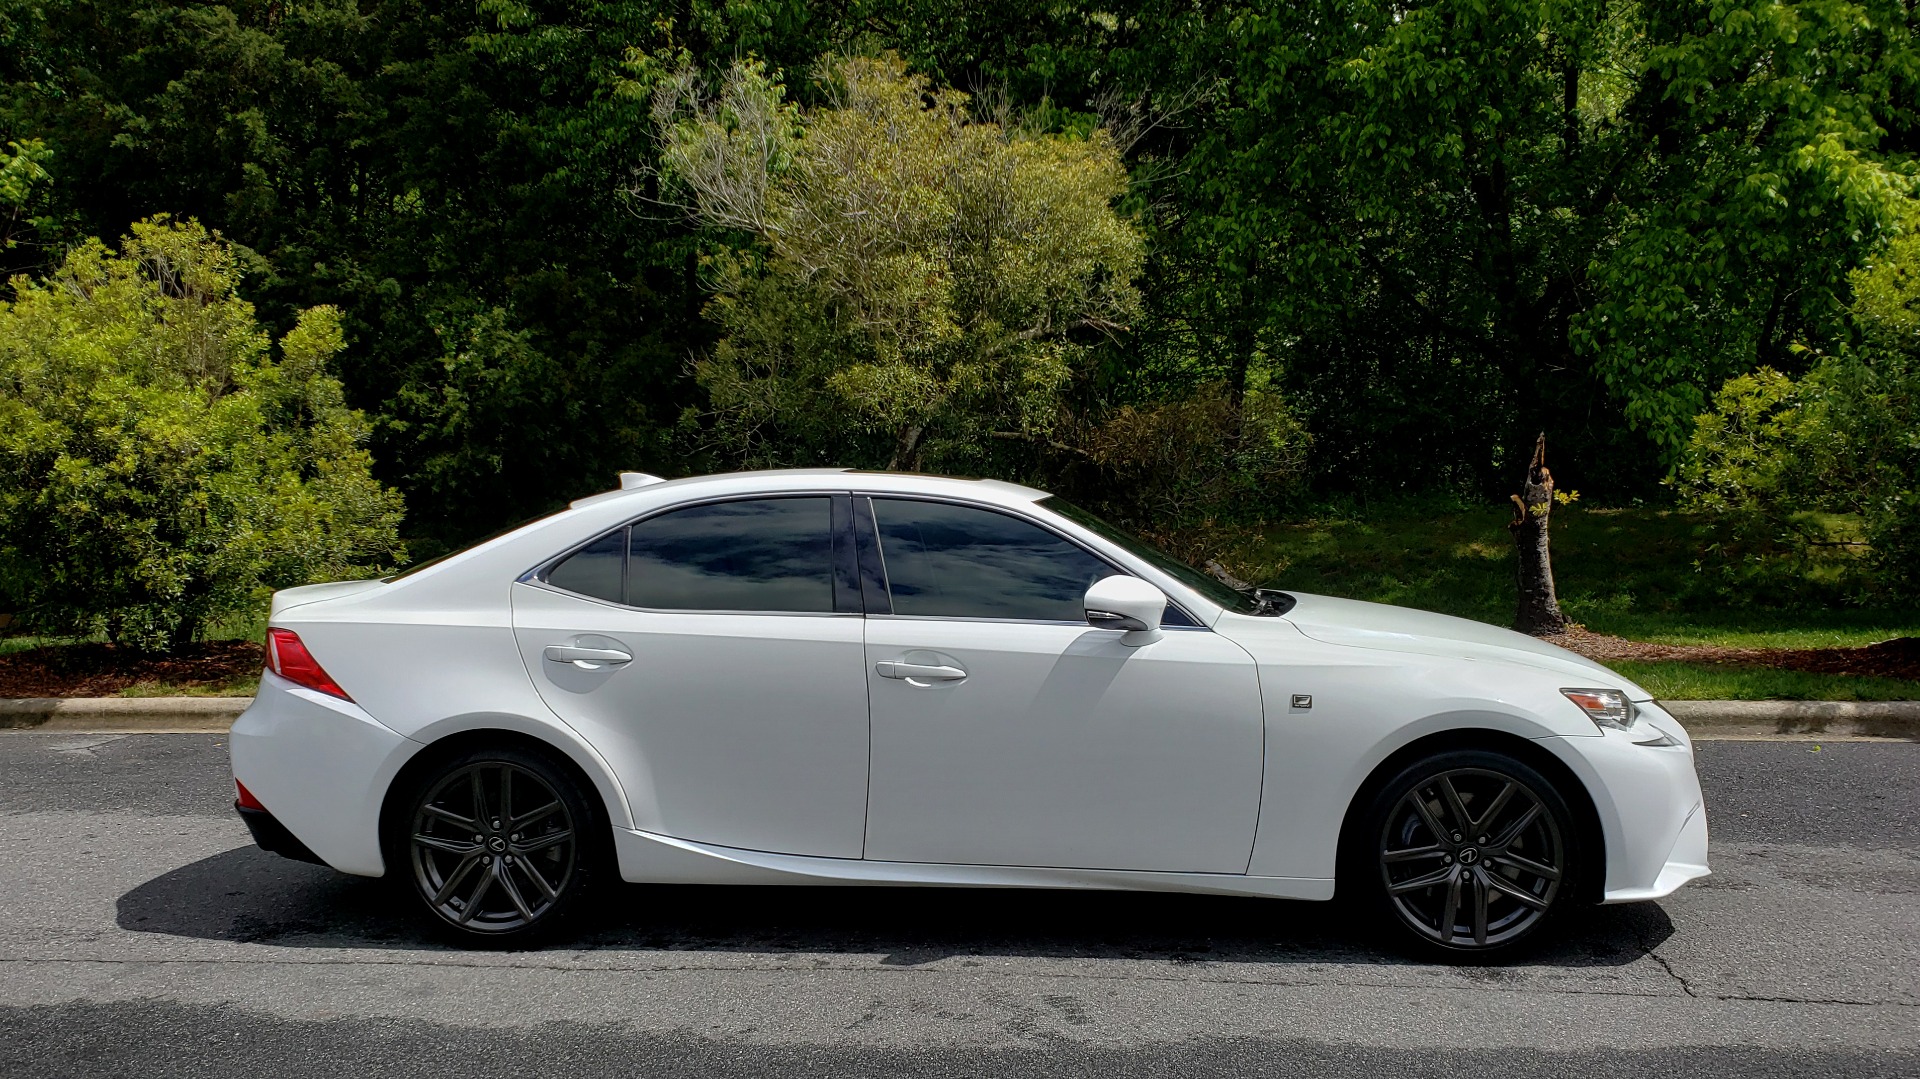 Used 2014 Lexus IS 350 F-SPORT / NAV / SUNROOF / REARVIEW / BSM / MARK LEV SND for sale Sold at Formula Imports in Charlotte NC 28227 5